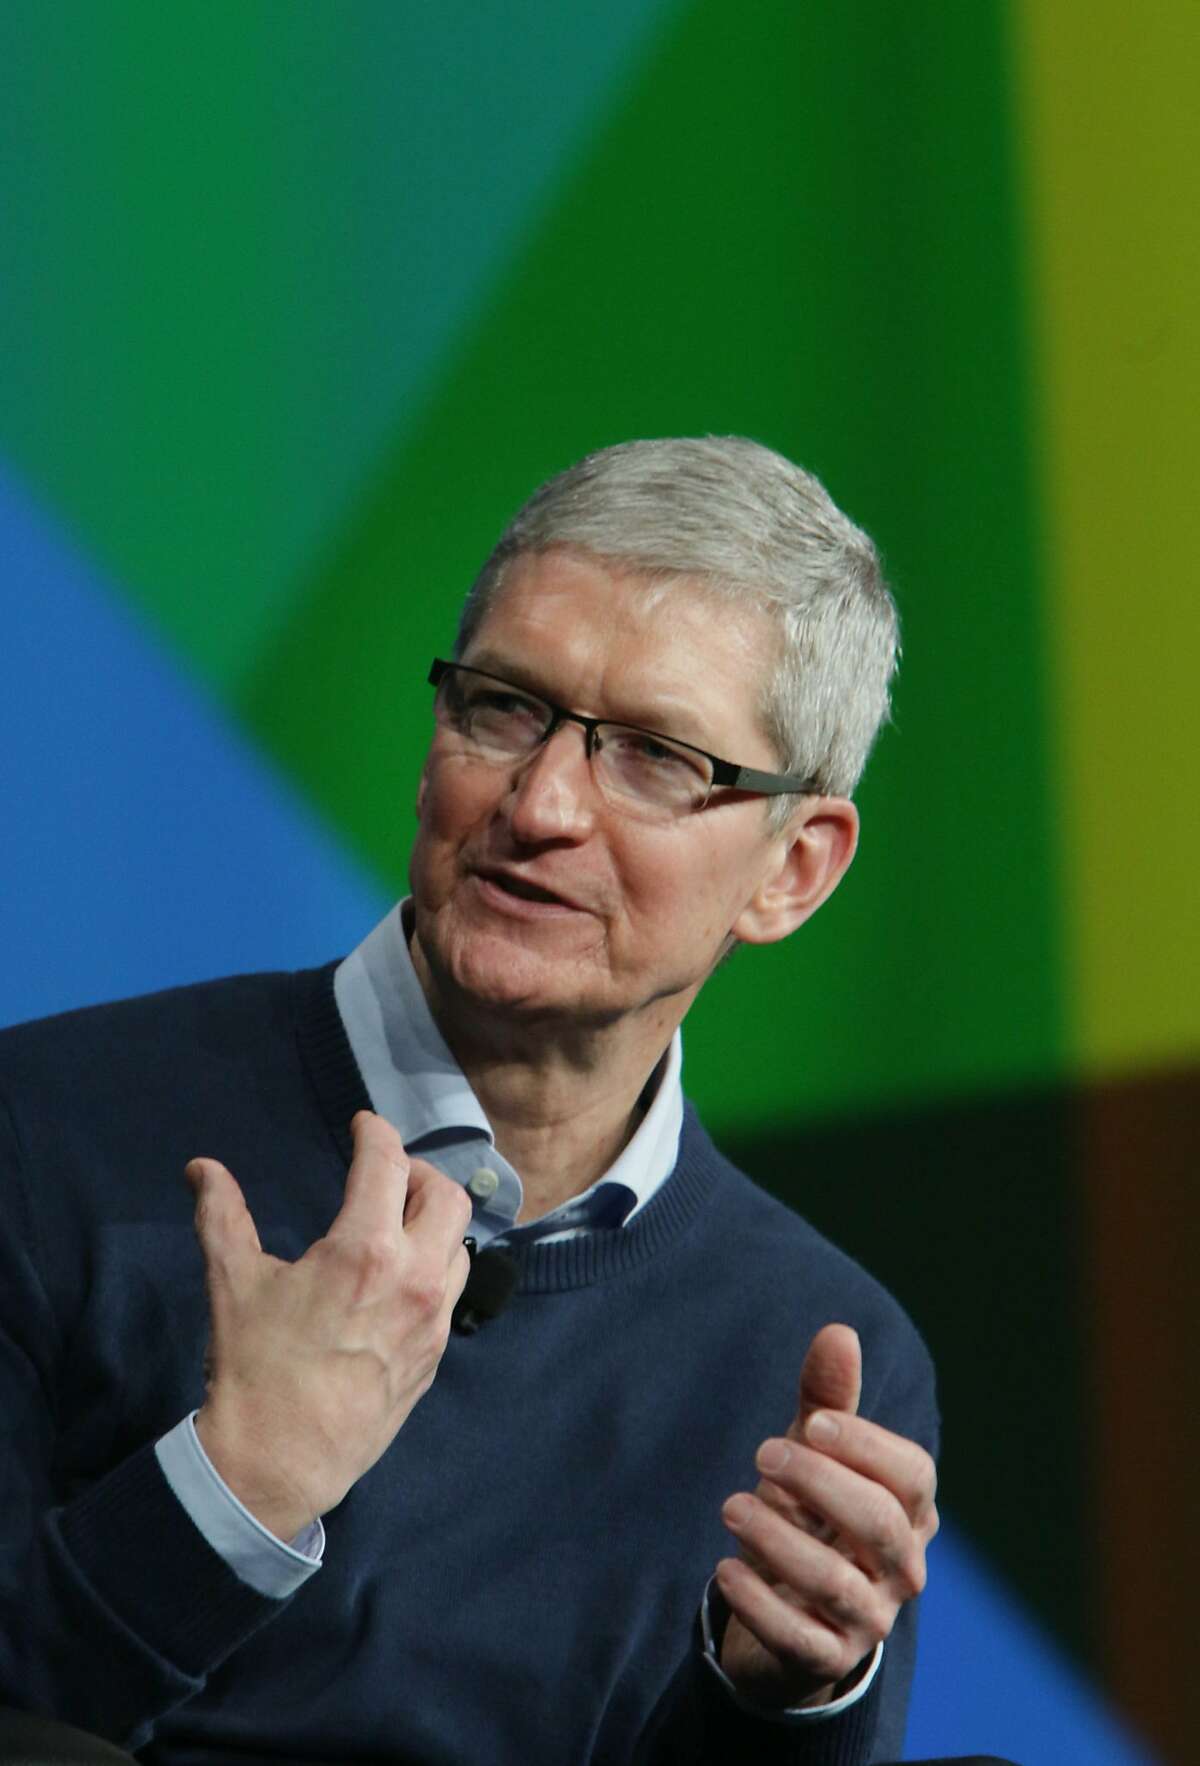 Tim Cook, CEO Apple, talks with Aaron Levie (not shown), CEO co-founder and chairman BOX during A Conversation Between Tim Cook and Aaron Levie at the Moscone Center at BoxWorks 2015 on Tuesday, September 29, 2015 in San Francisco, Calif. Aaron Levie and Tim Cook kicked off the BoxWorks20155 with a fireside chat, A Conversation with Tim Cook and Aaron Levie, which included discussion about the future of Apple regarding enterprise, the ability of technology, partnerships to deliver better solutions for customers and business and technology impacting social issues.